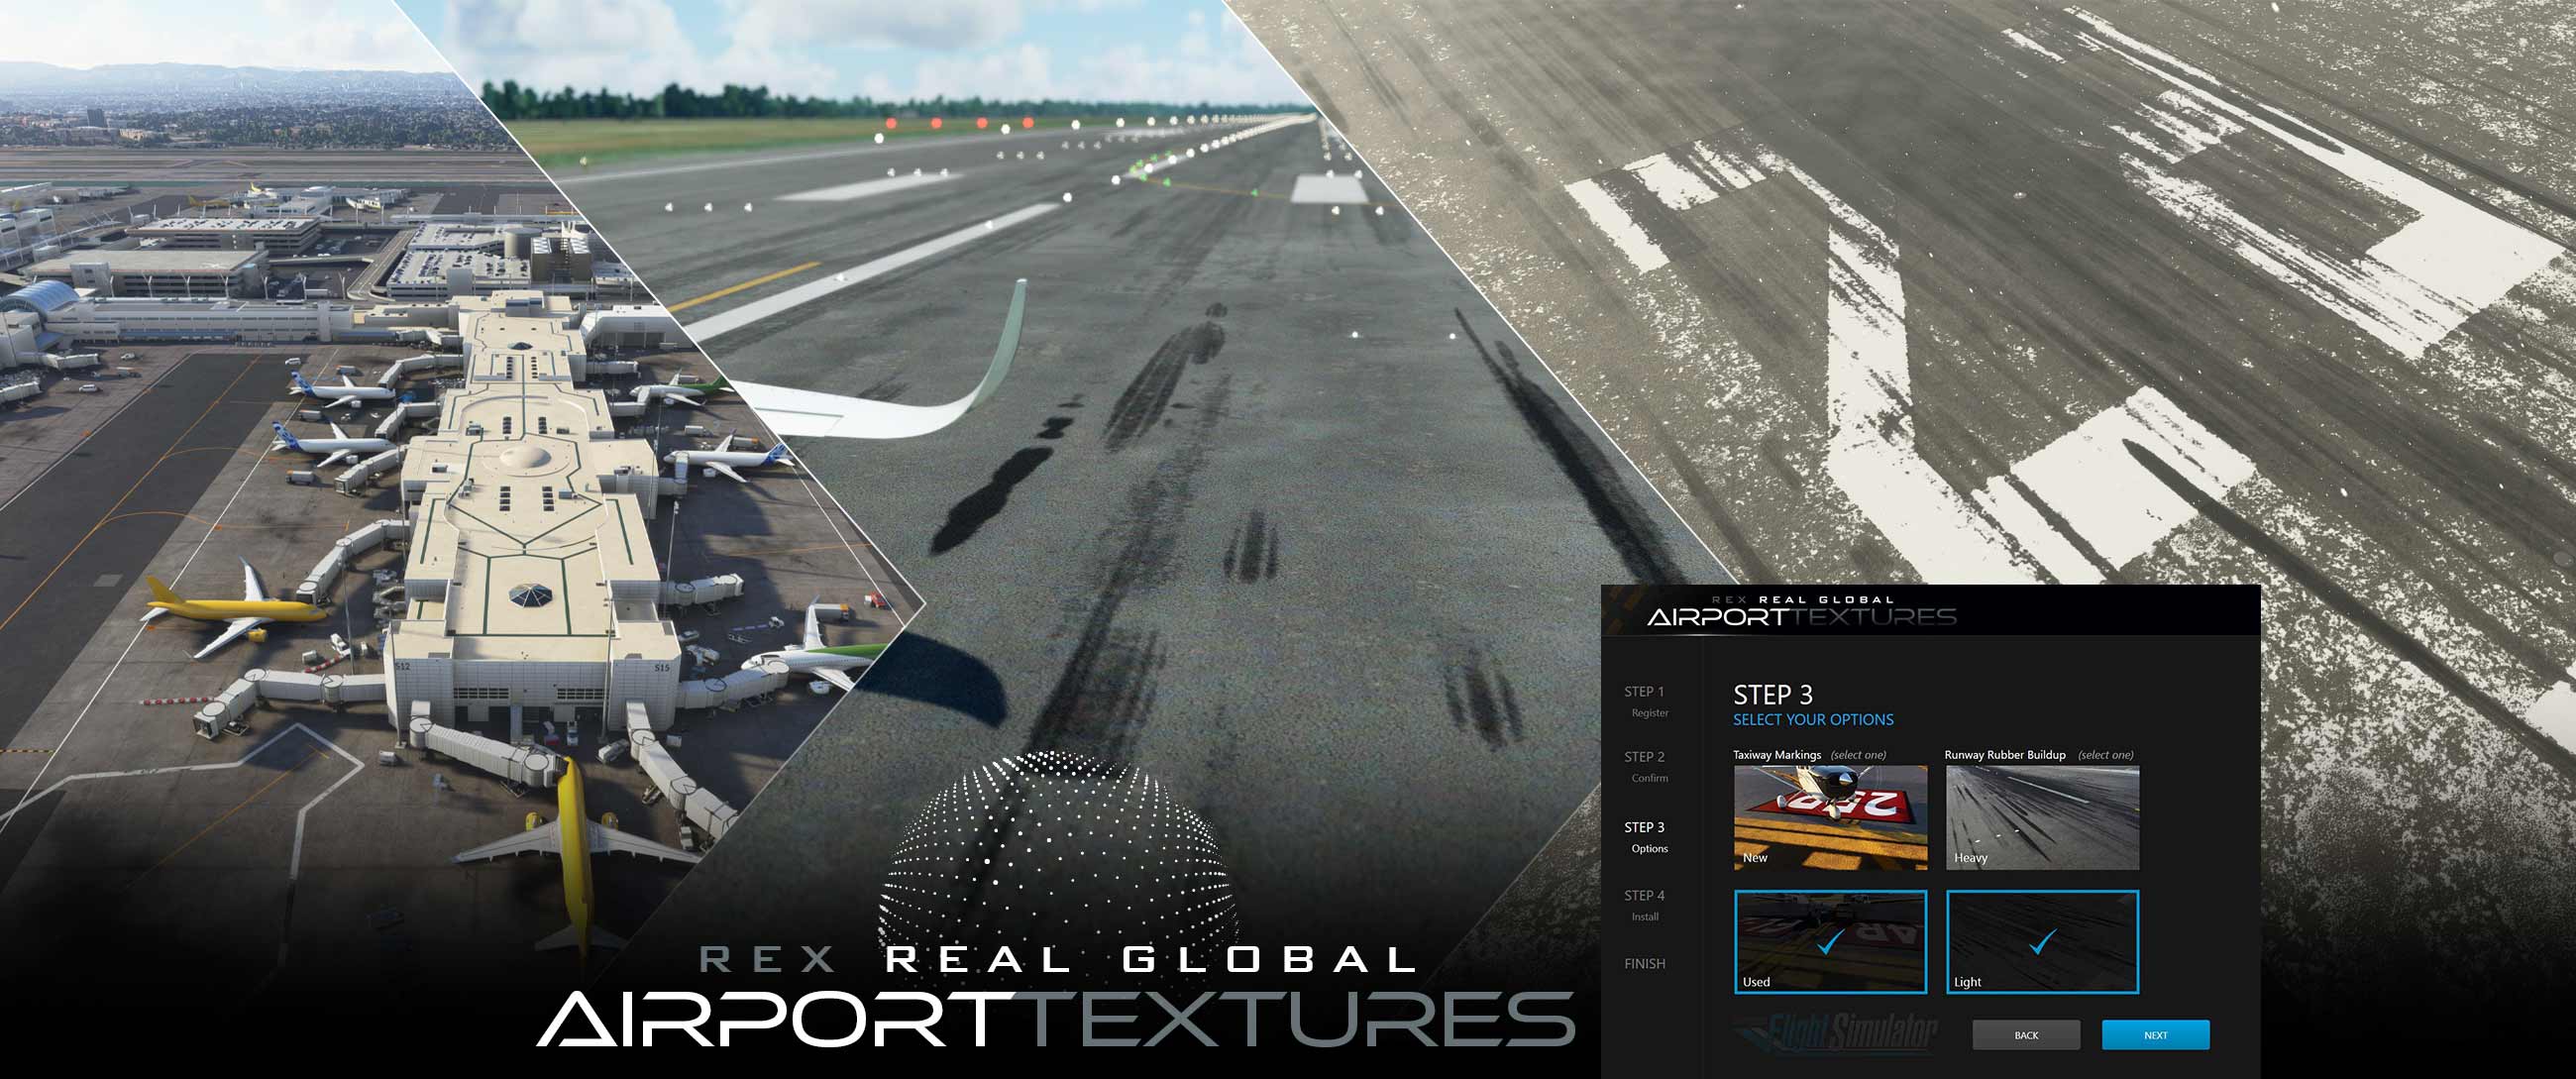 REX Real Global Airport Textures NEW